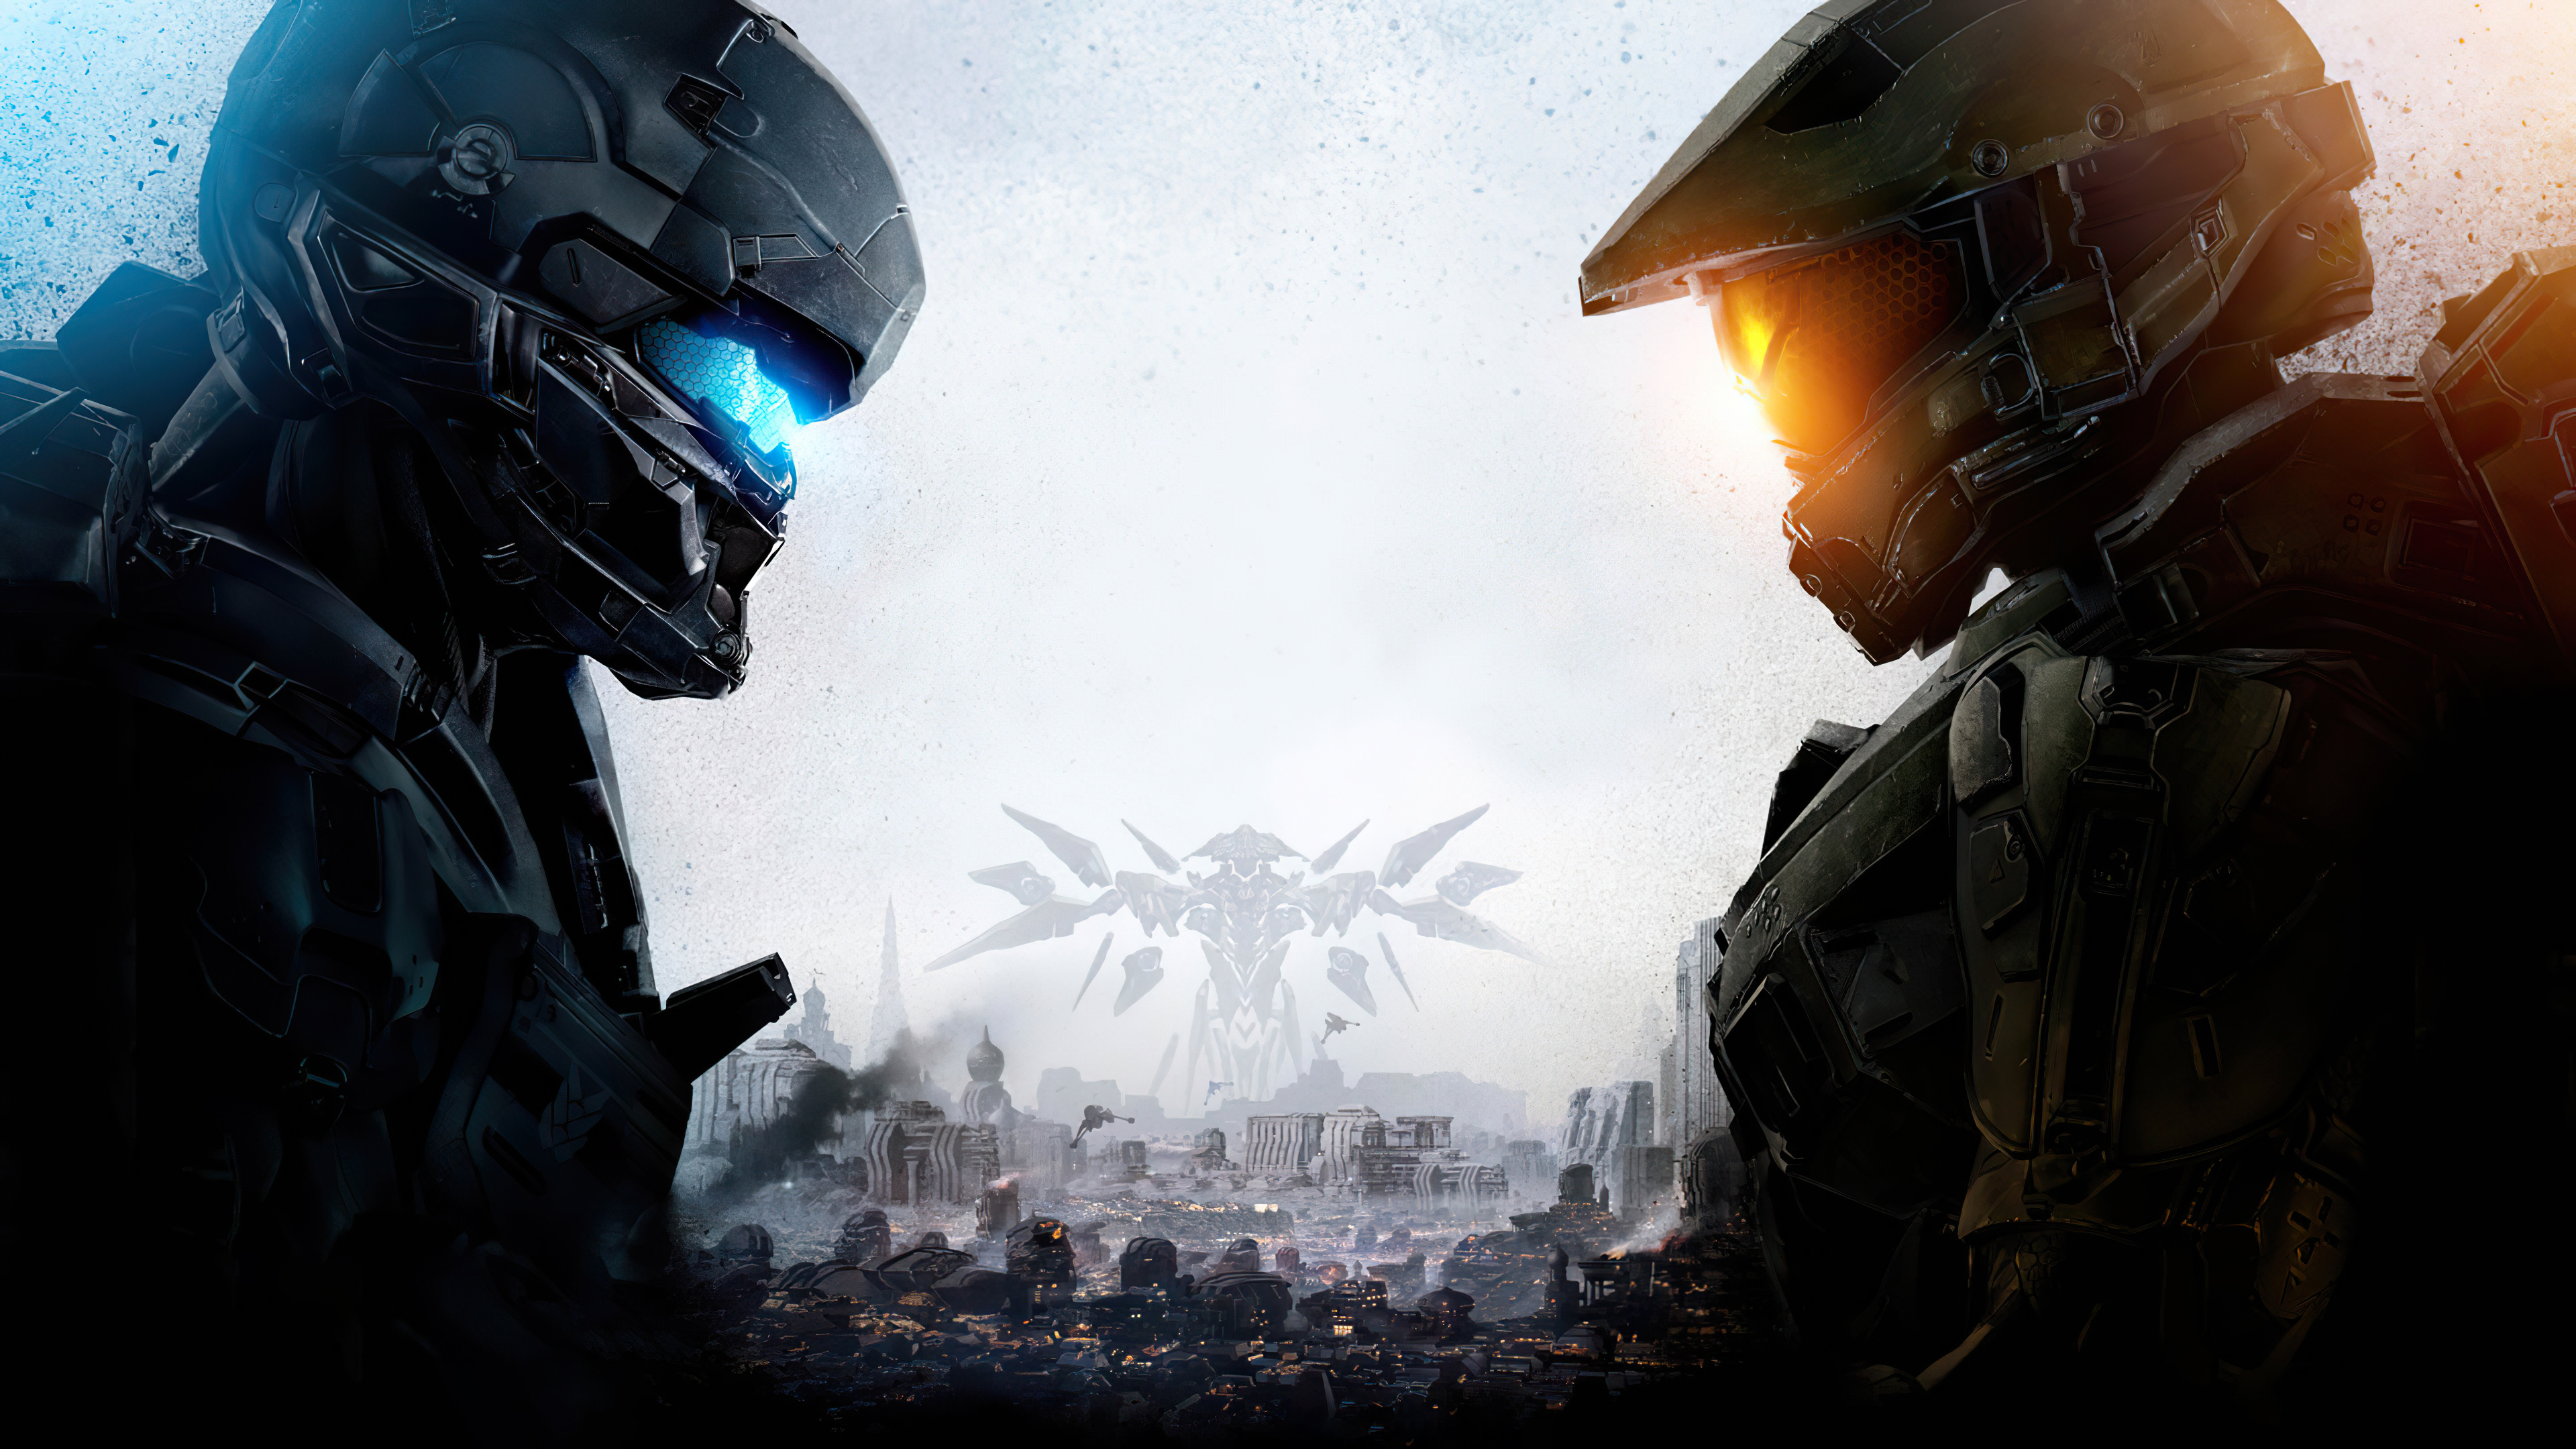 Free photo Two soldiers from the game Halo 5